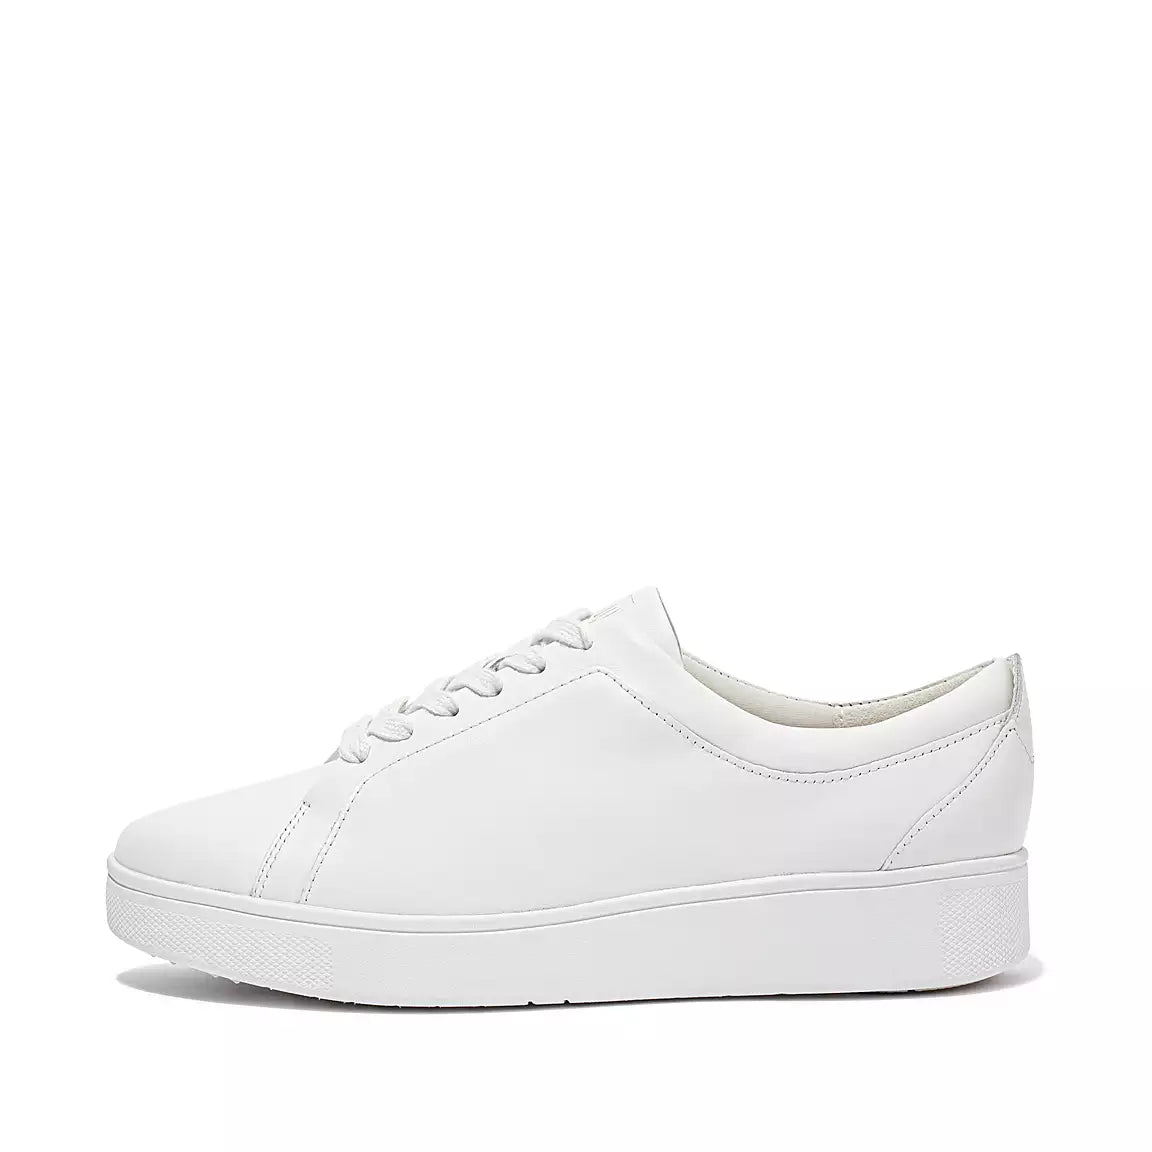 FitFlop FitFlop RALLY Leather Trainers  Urban White 3 